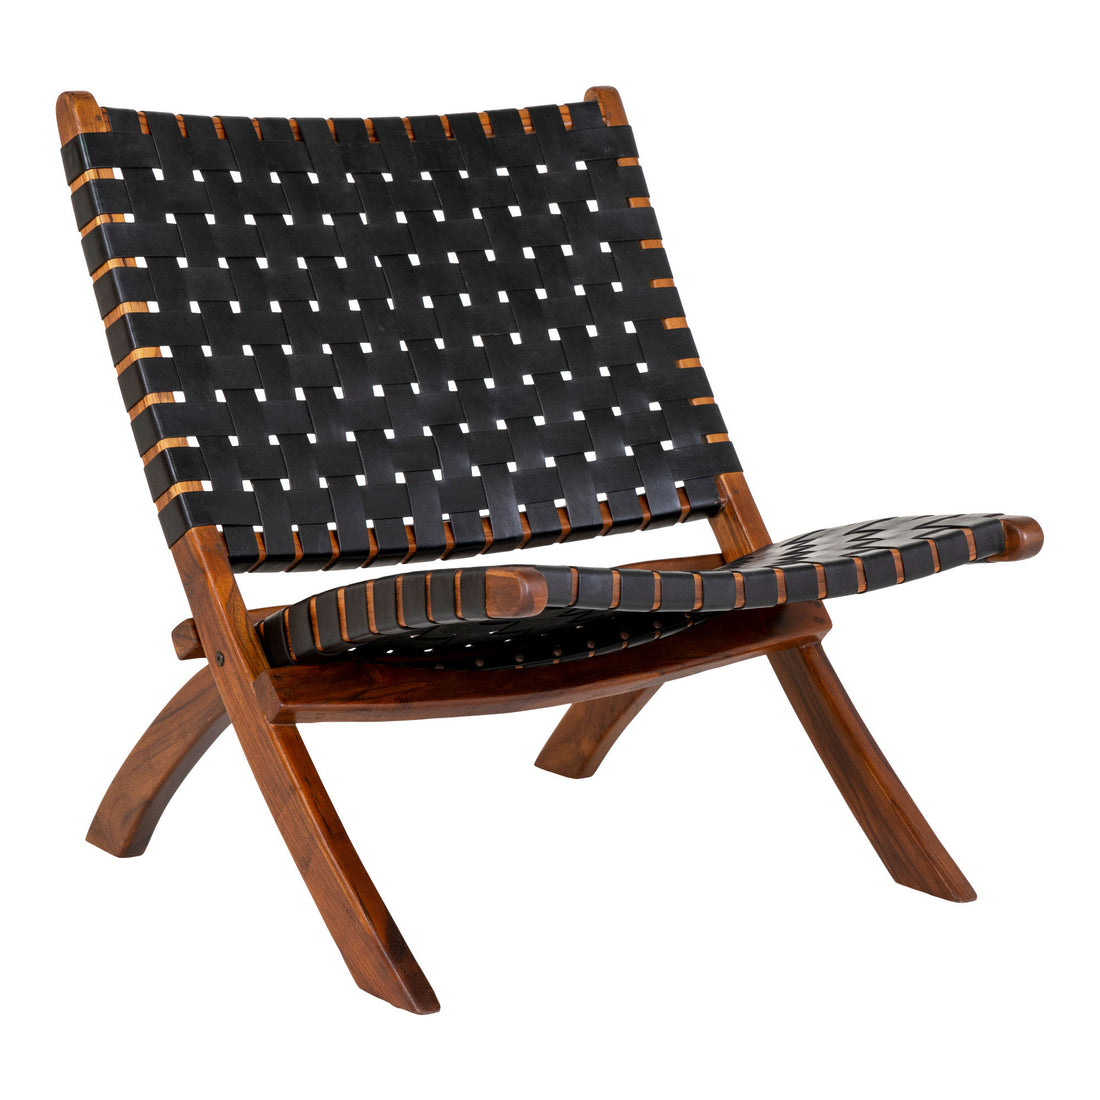 House Nordic - Perugia folding chair